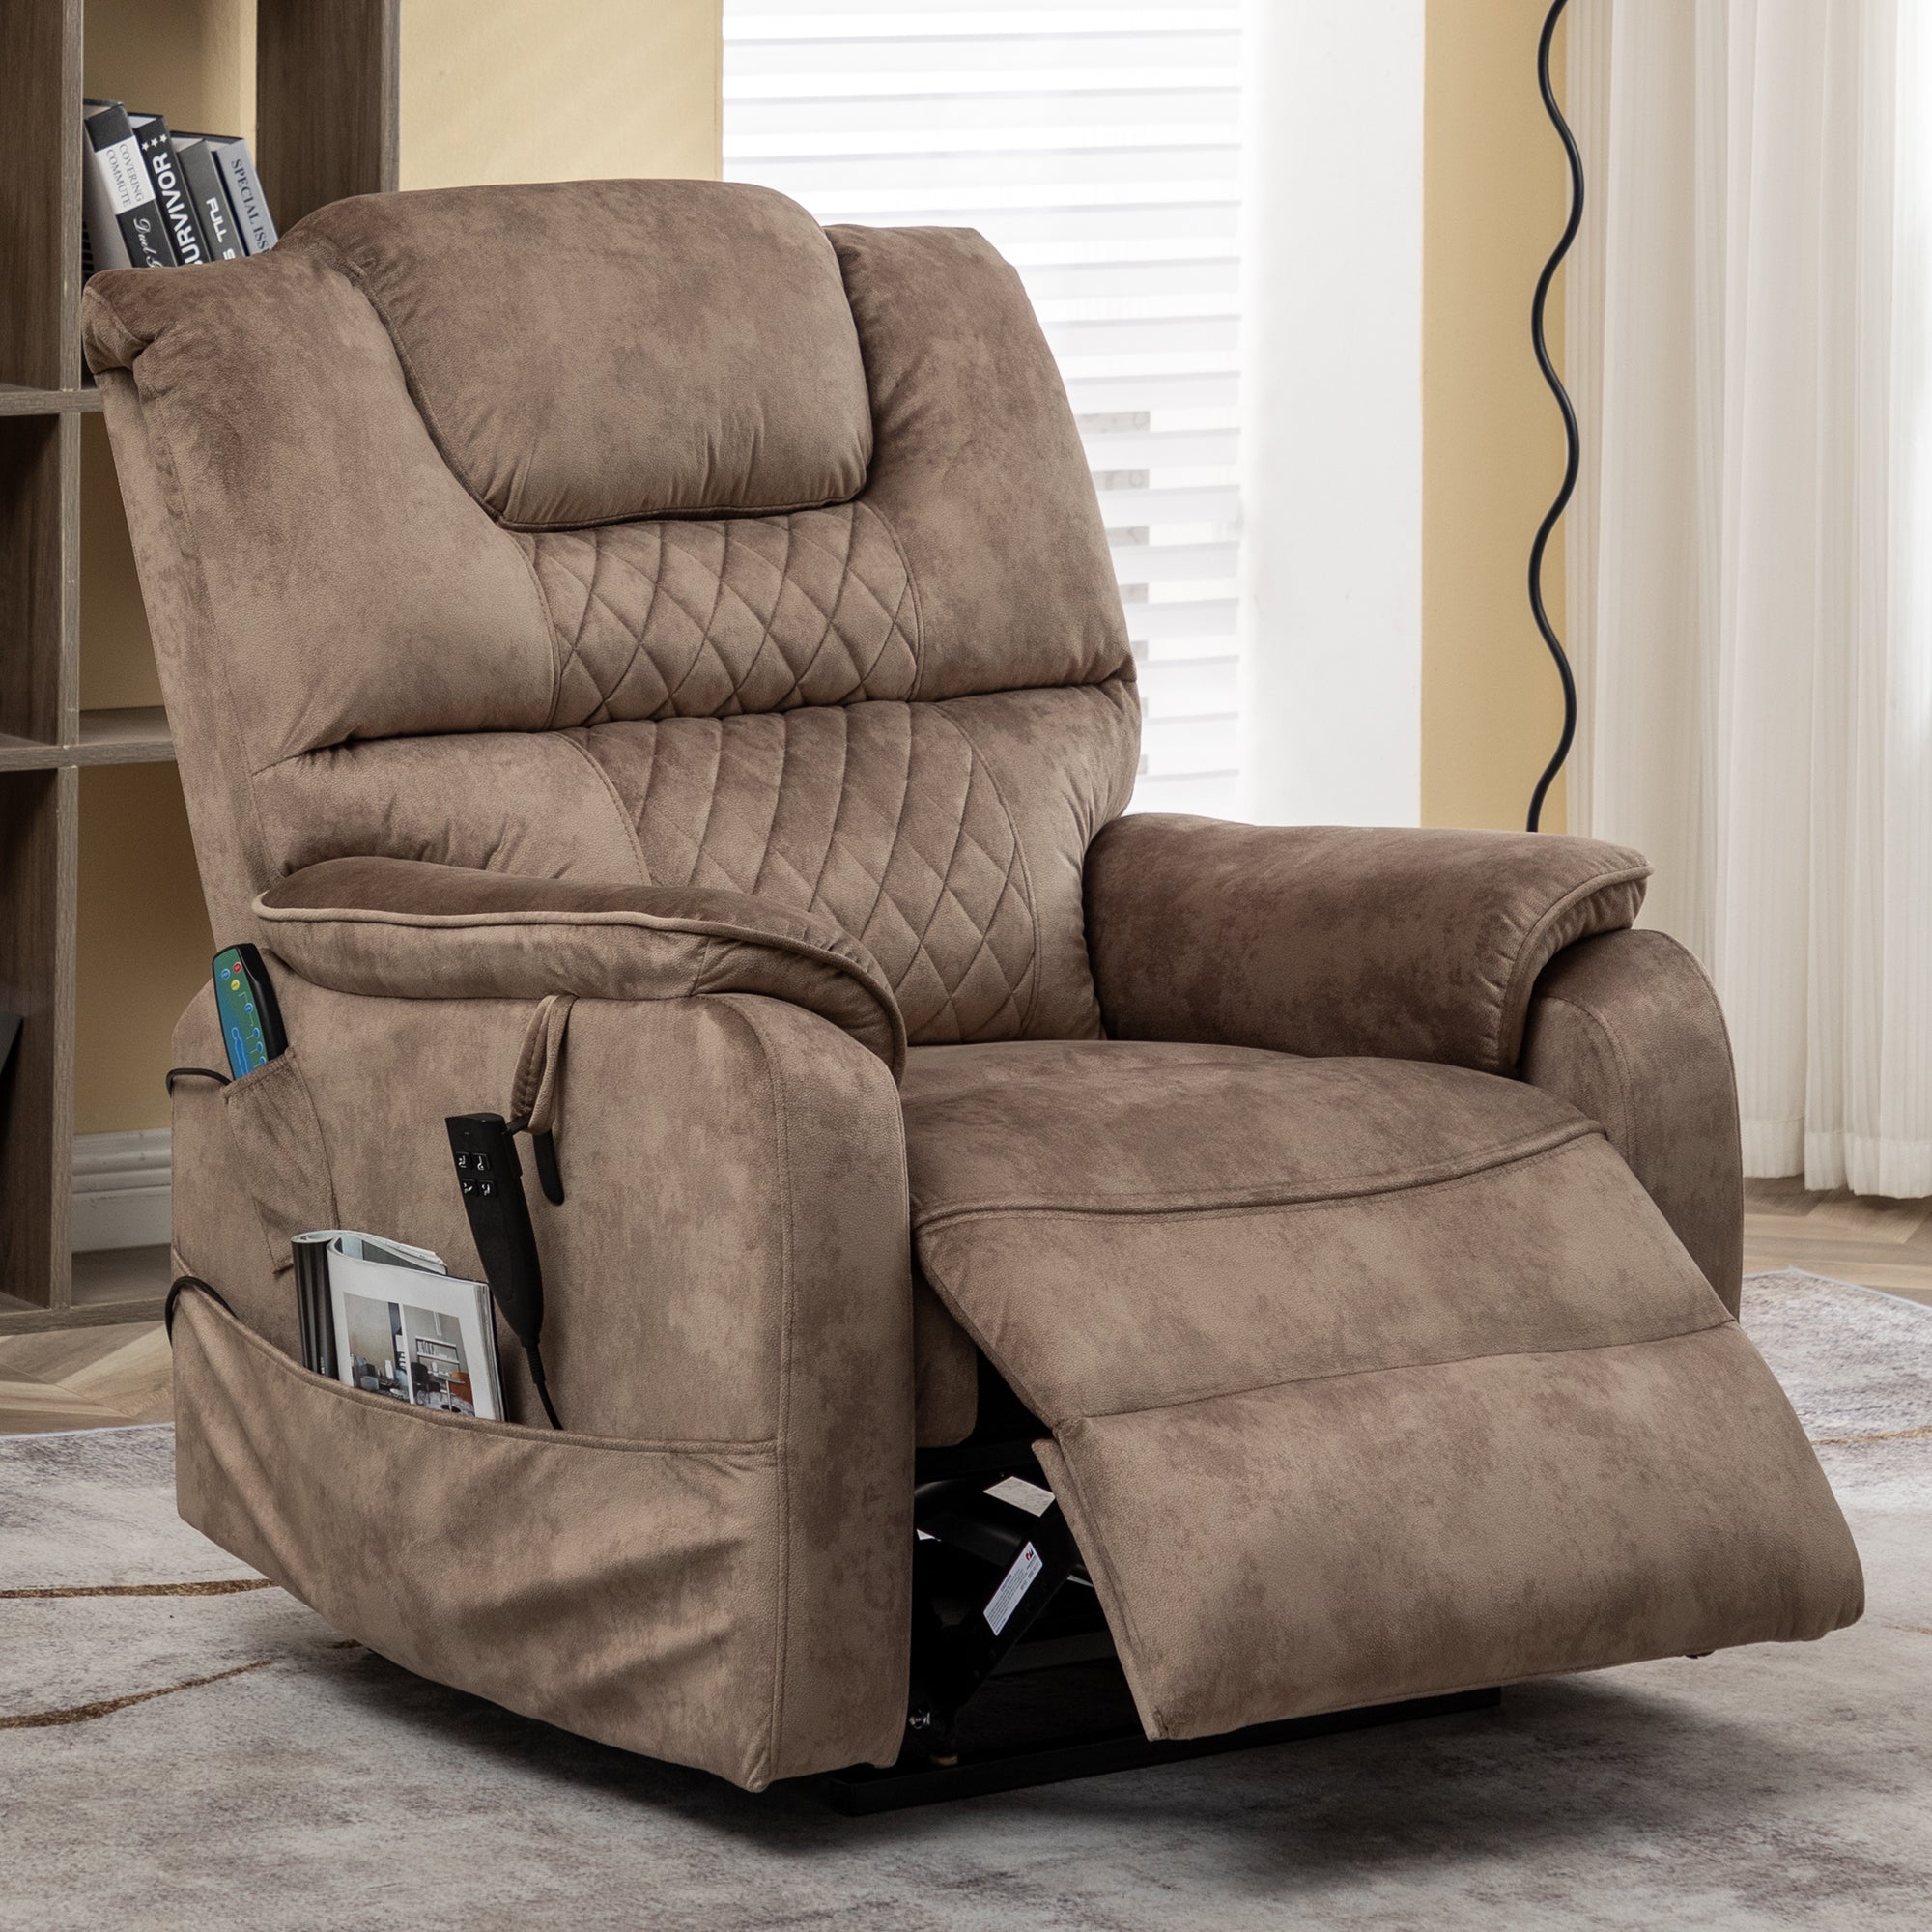 uhomepro Large Electric Massage Recliner with Heat, PU Leather